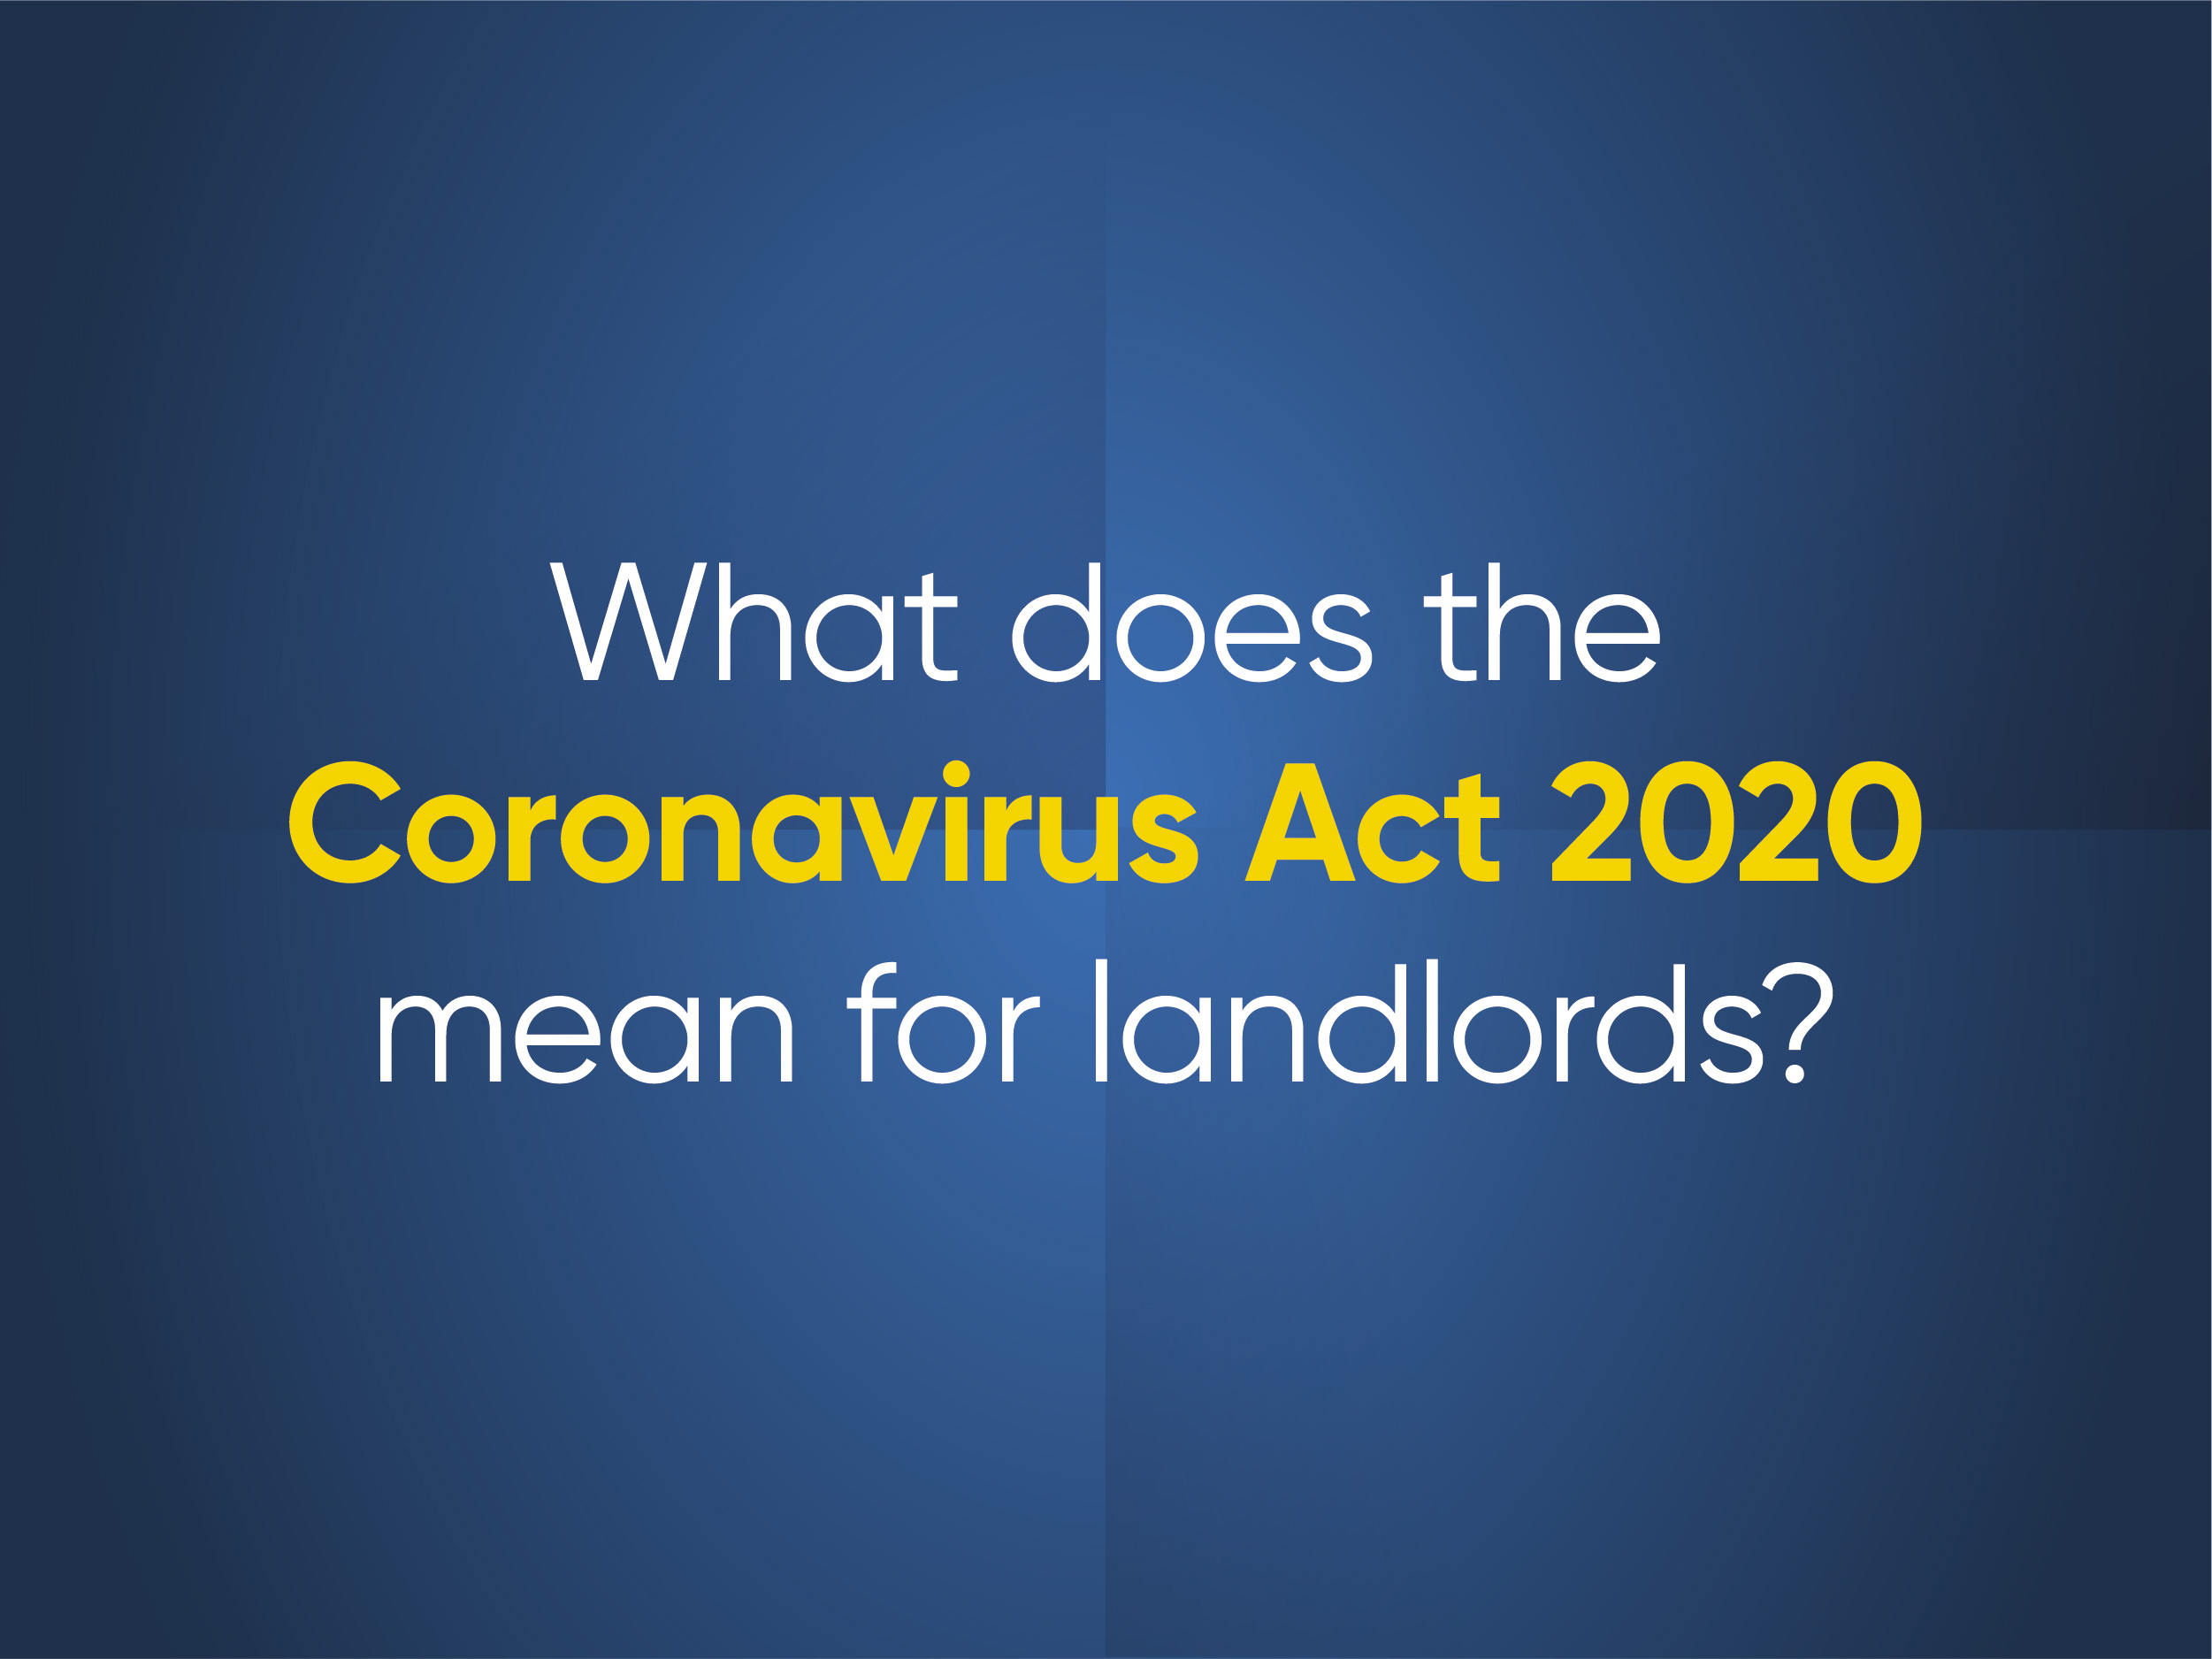 What does the coronavirus act 2020 mean for landlords?